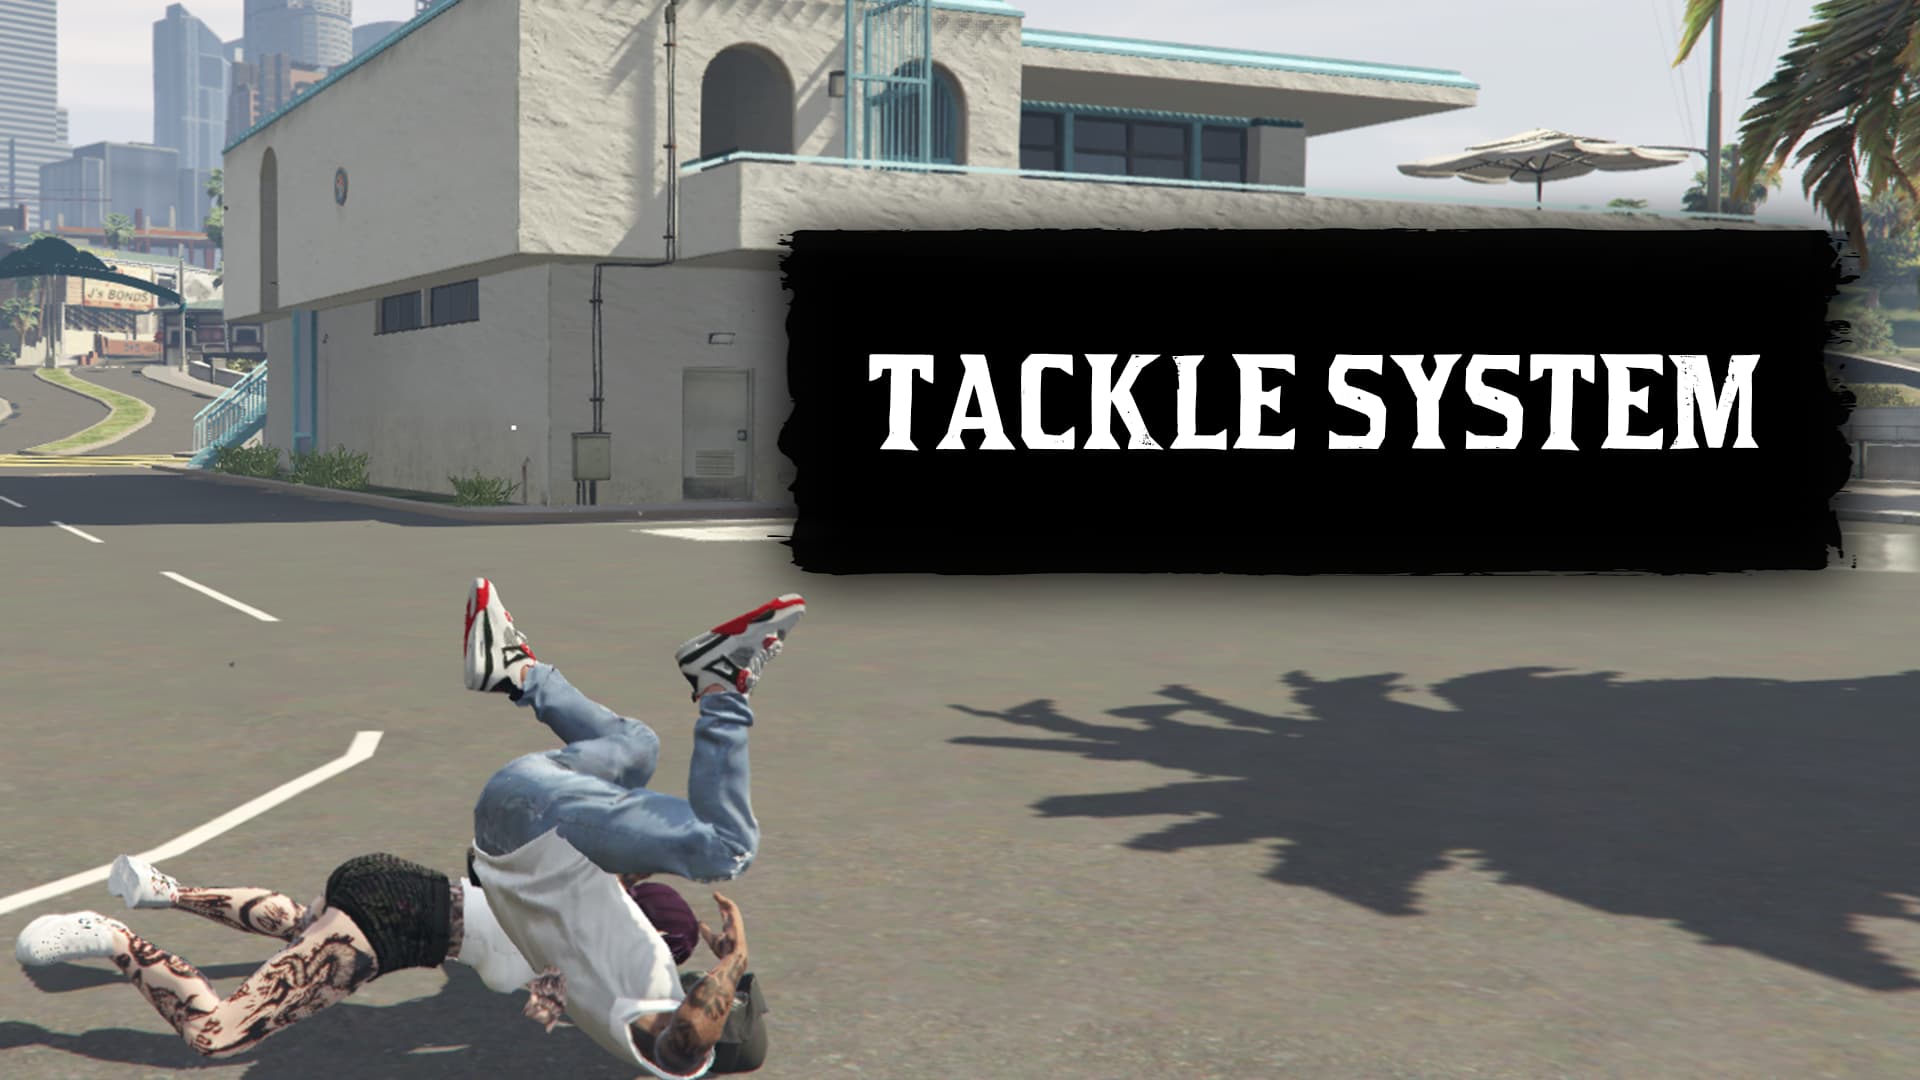 FREE] Tackle System with animations [OPEN] - Releases - Cfx.re